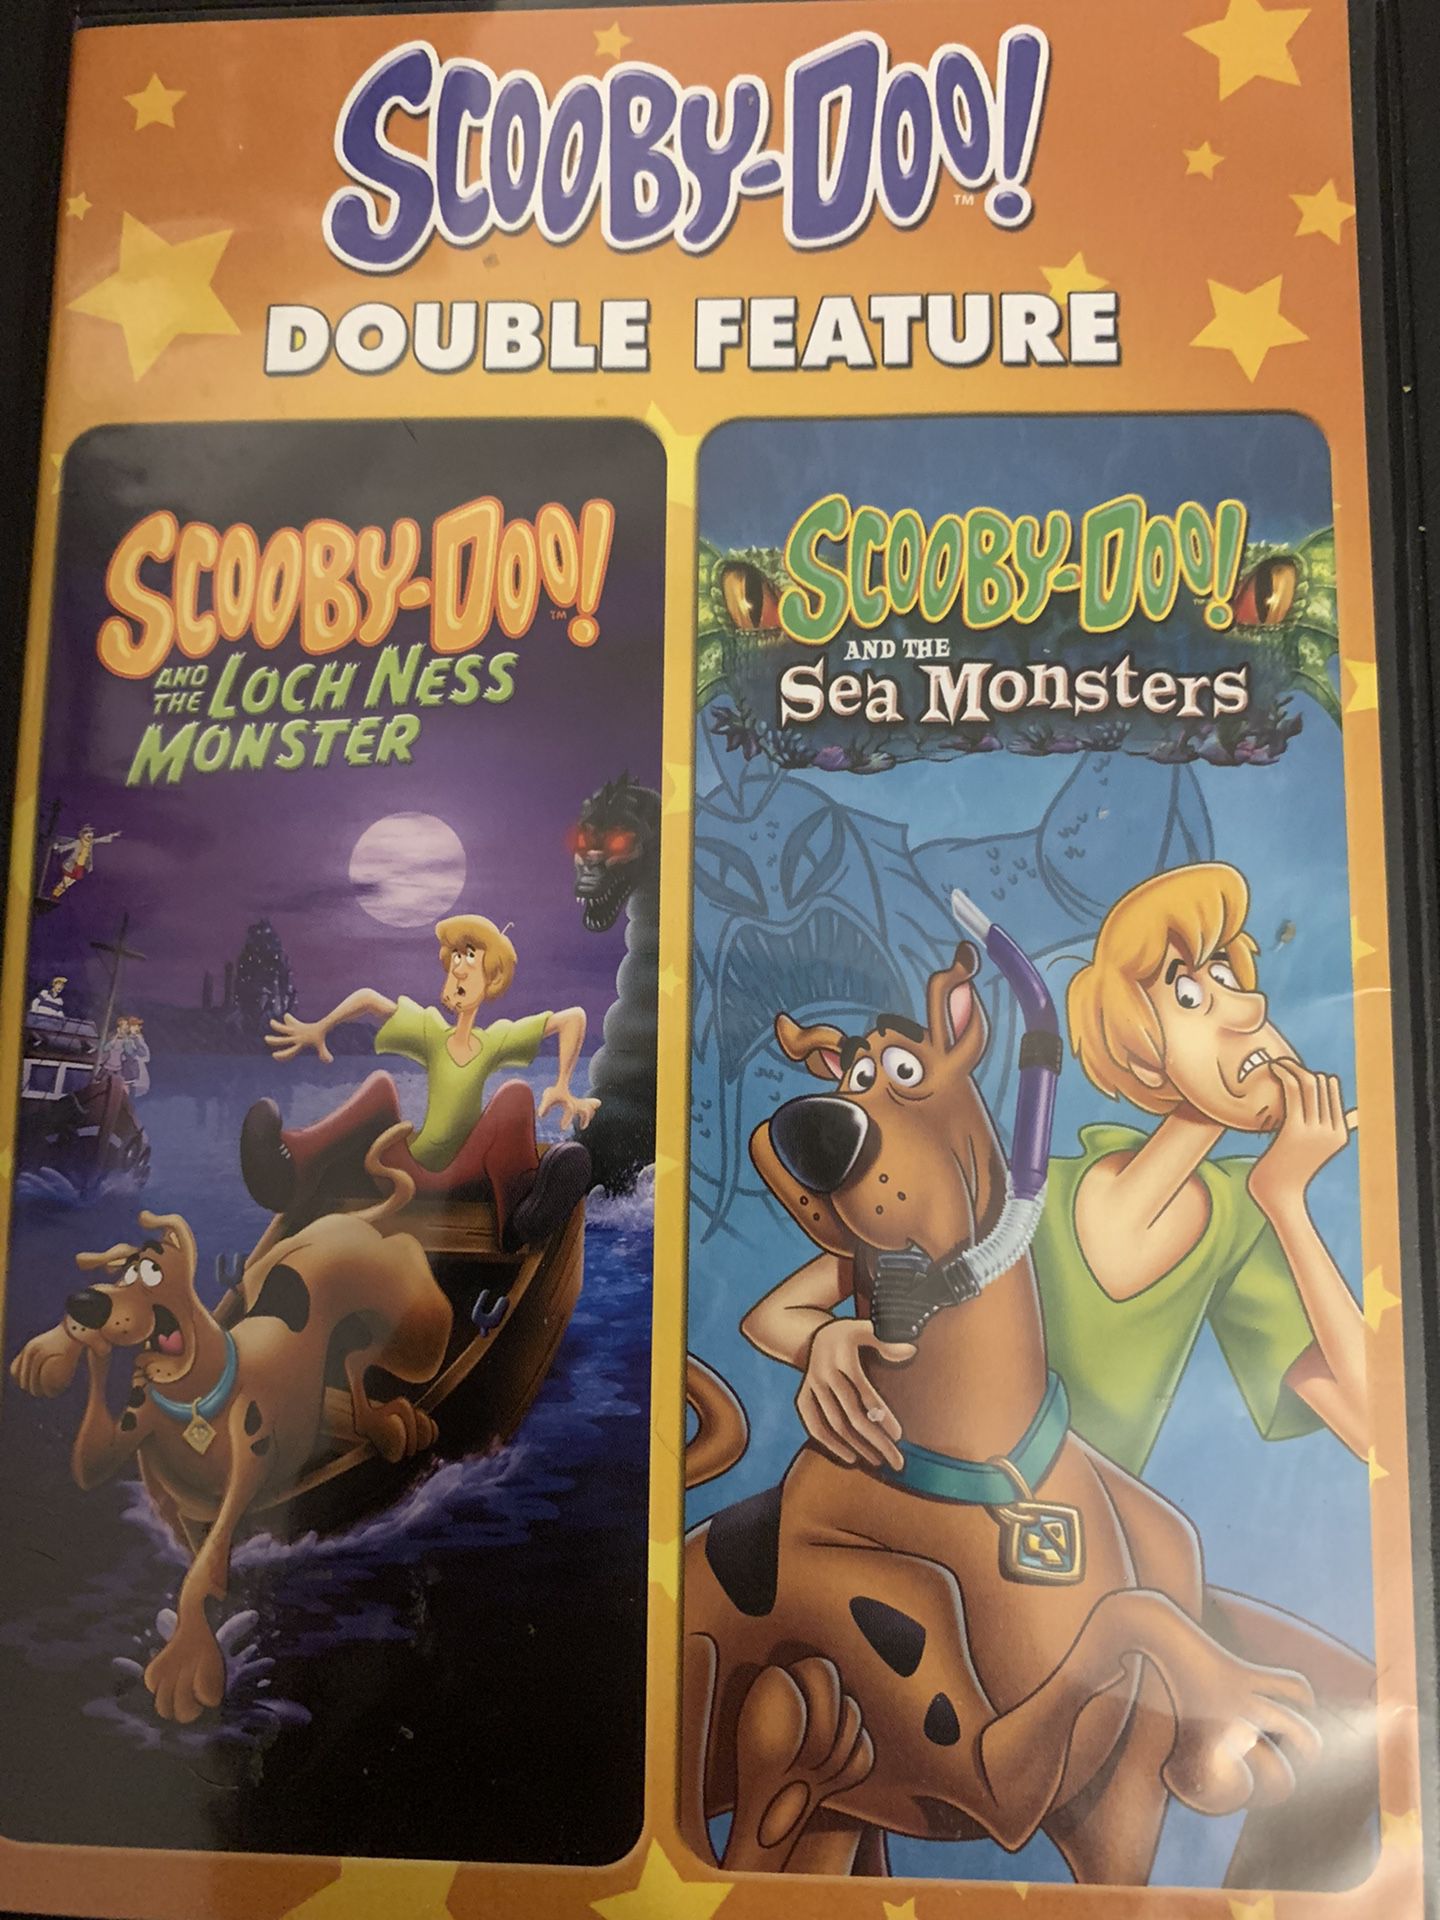 SCOOBY-DOO! Double Feature (DVD)